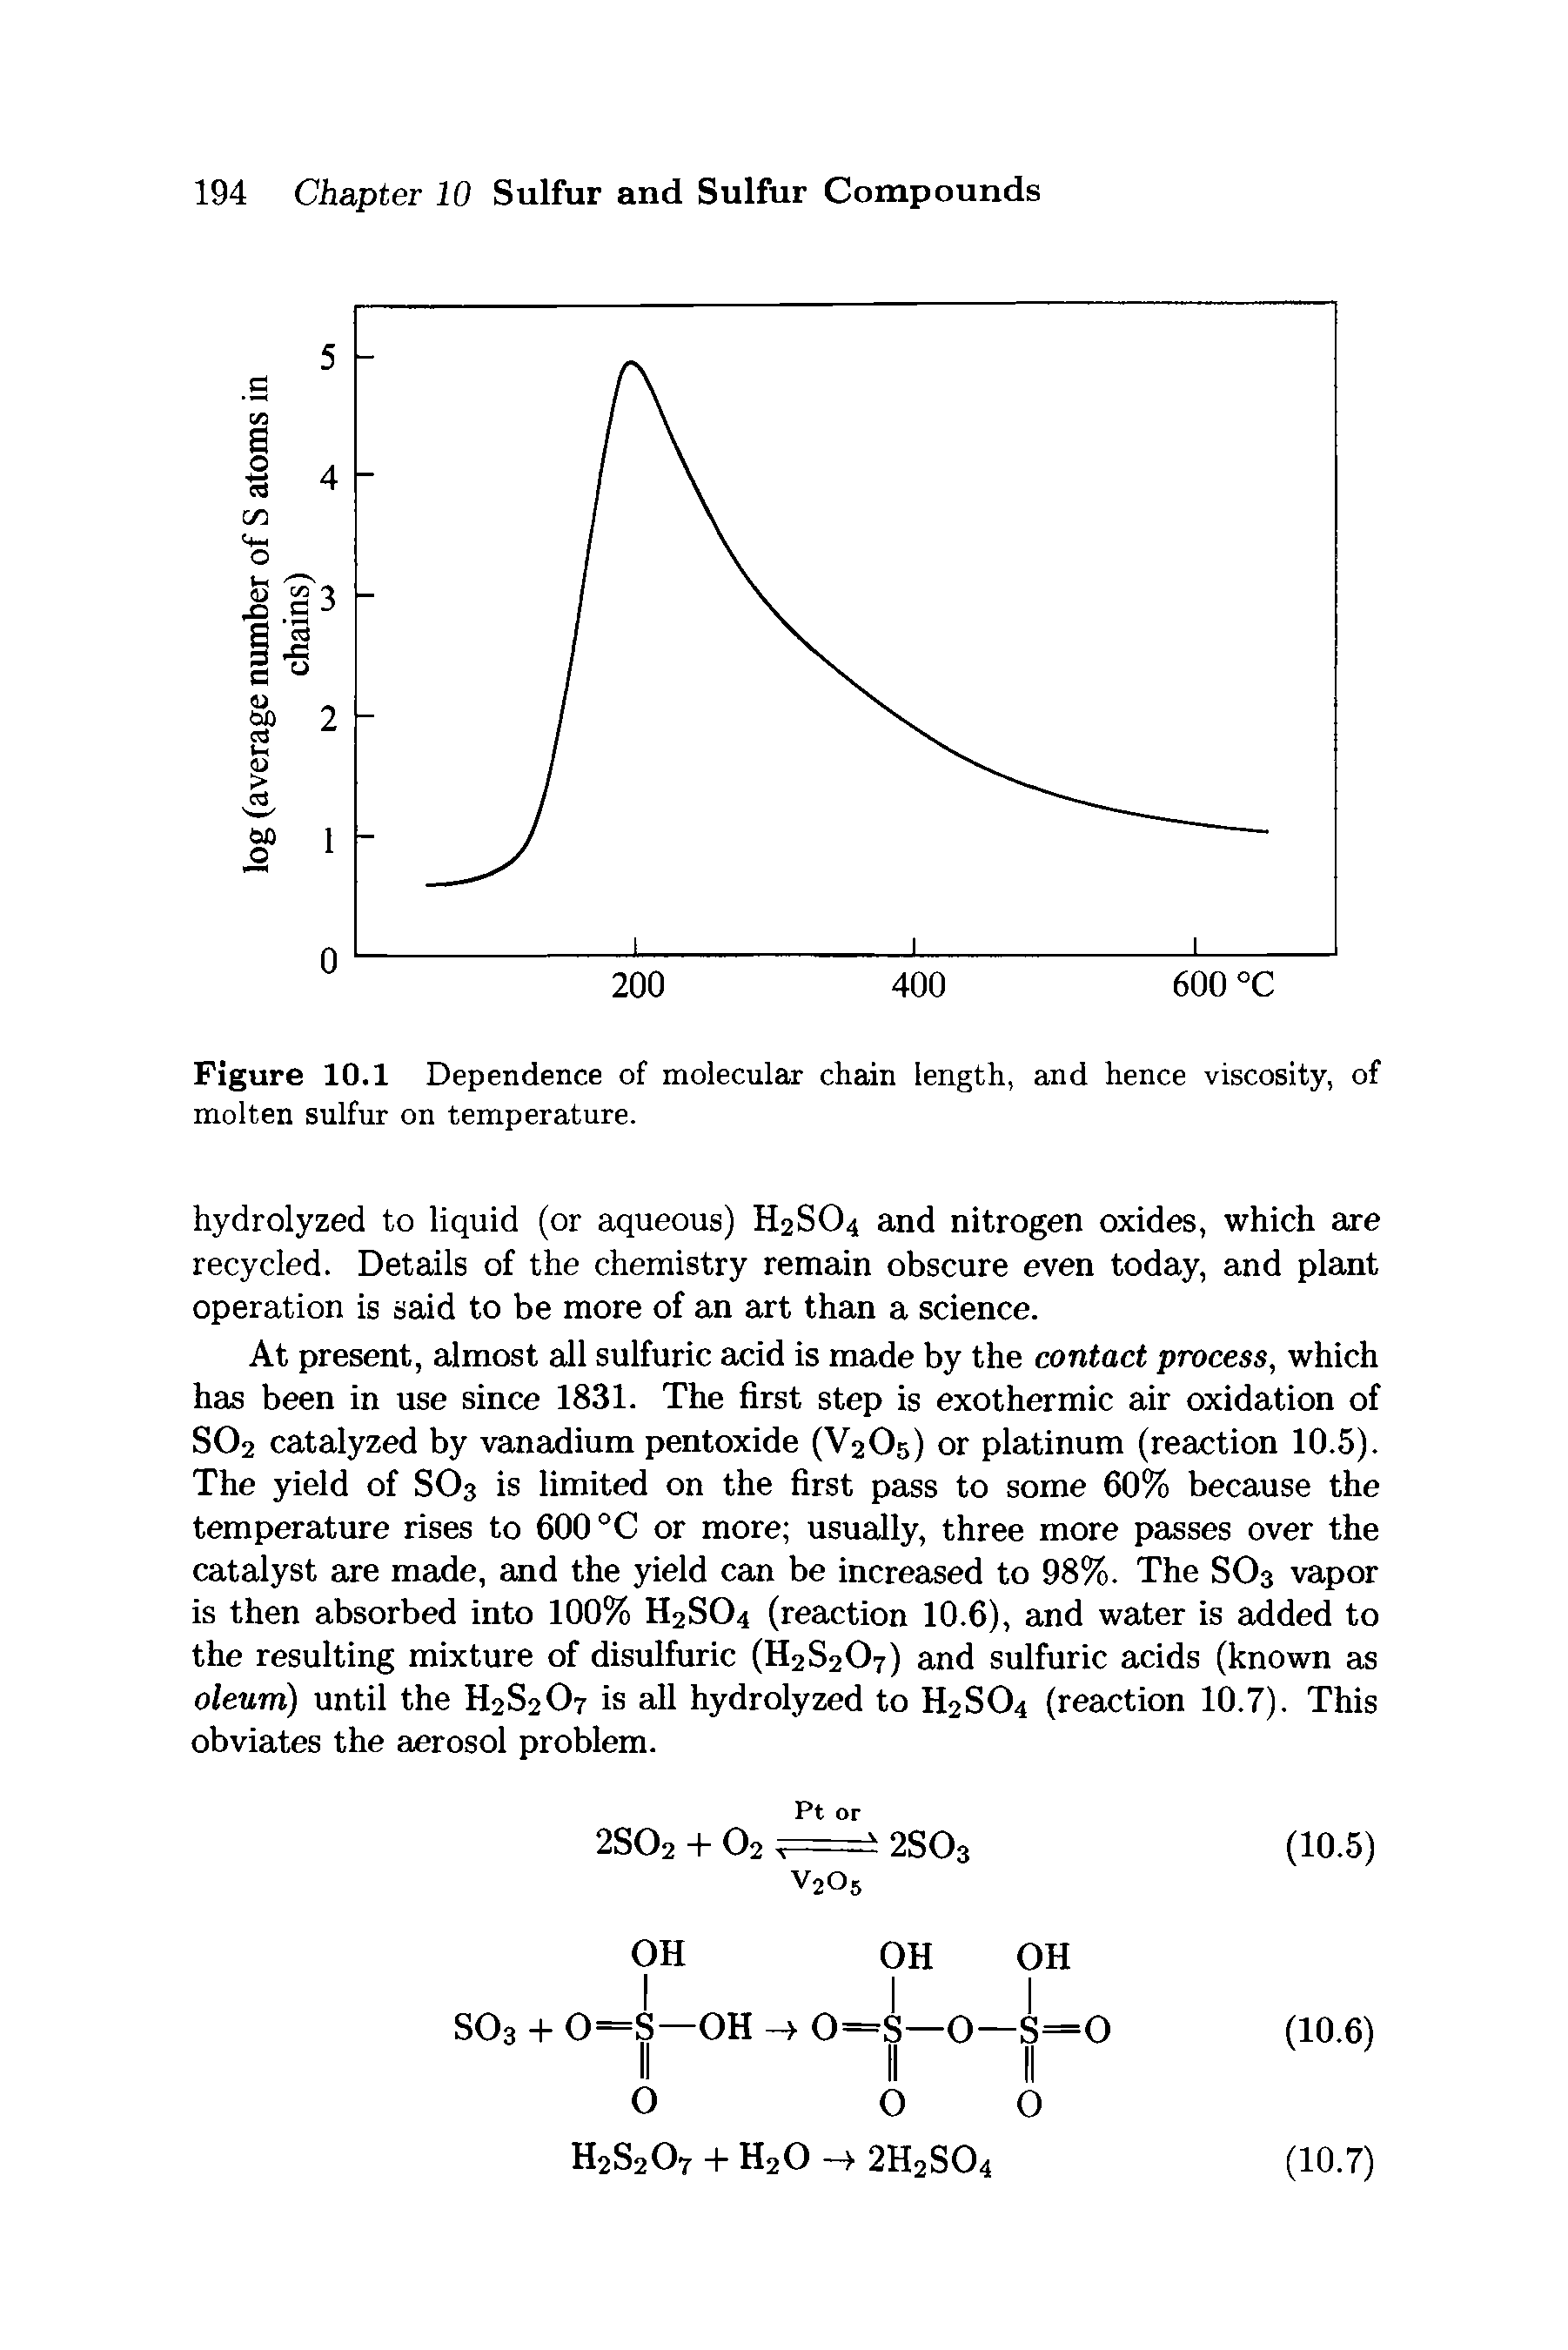 Figure 10.1 Dependence of molecular chain length, and hence viscosity, of molten sulfur on temperature.